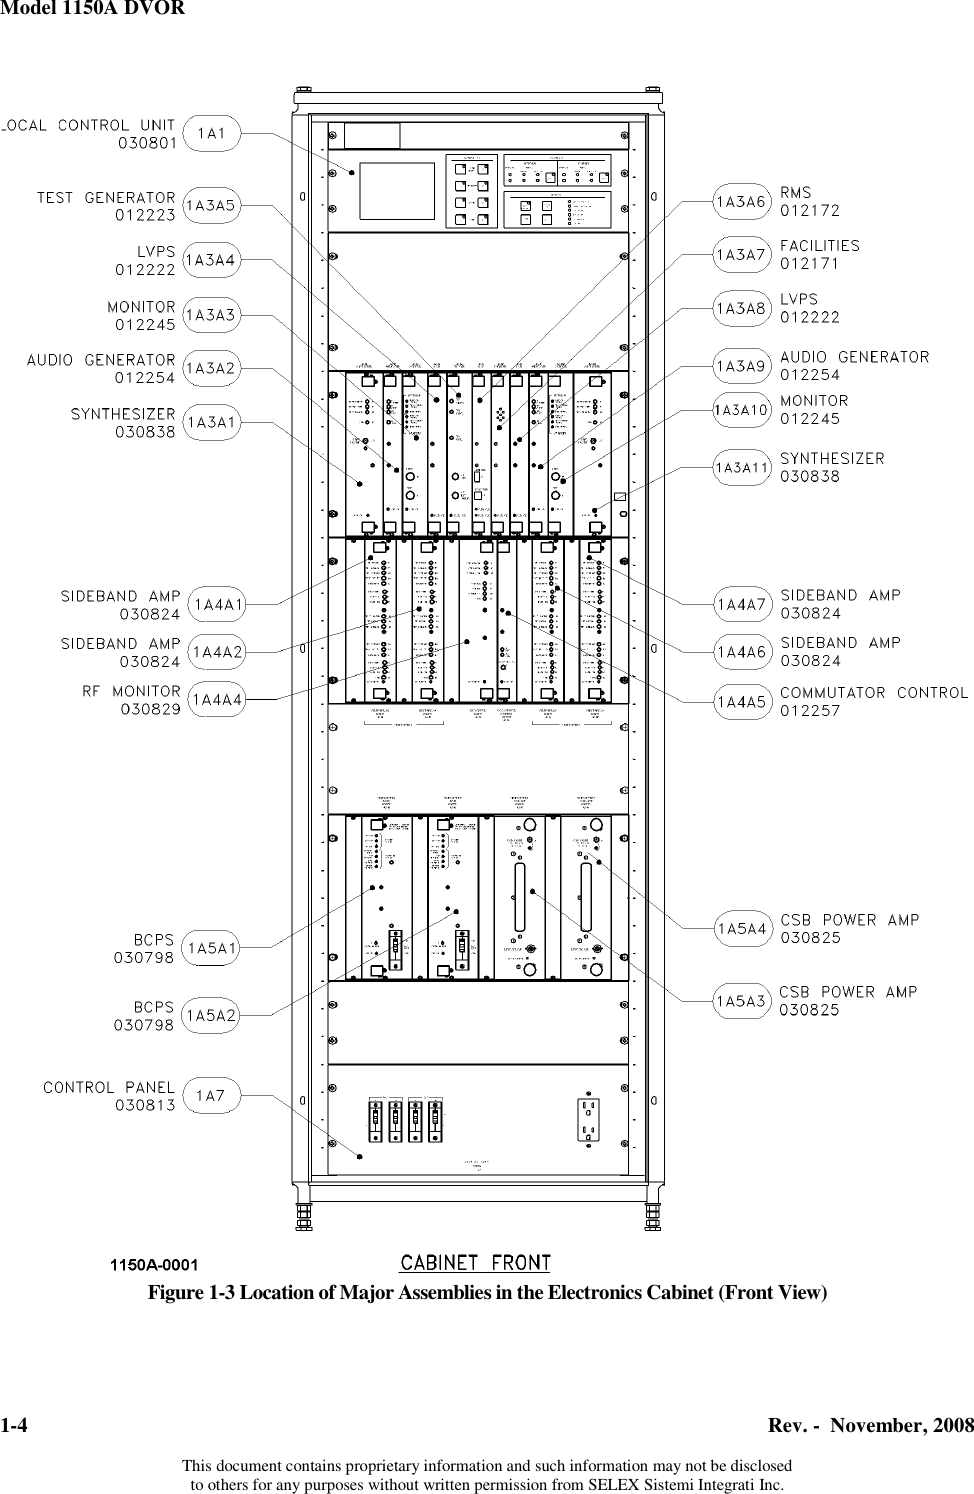 Model 1150A DVOR  1-4  Rev. -  November, 2008  This document contains proprietary information and such information may not be disclosed to others for any purposes without written permission from SELEX Sistemi Integrati Inc. Figure 1-3 Location of Major Assemblies in the Electronics Cabinet (Front View) 